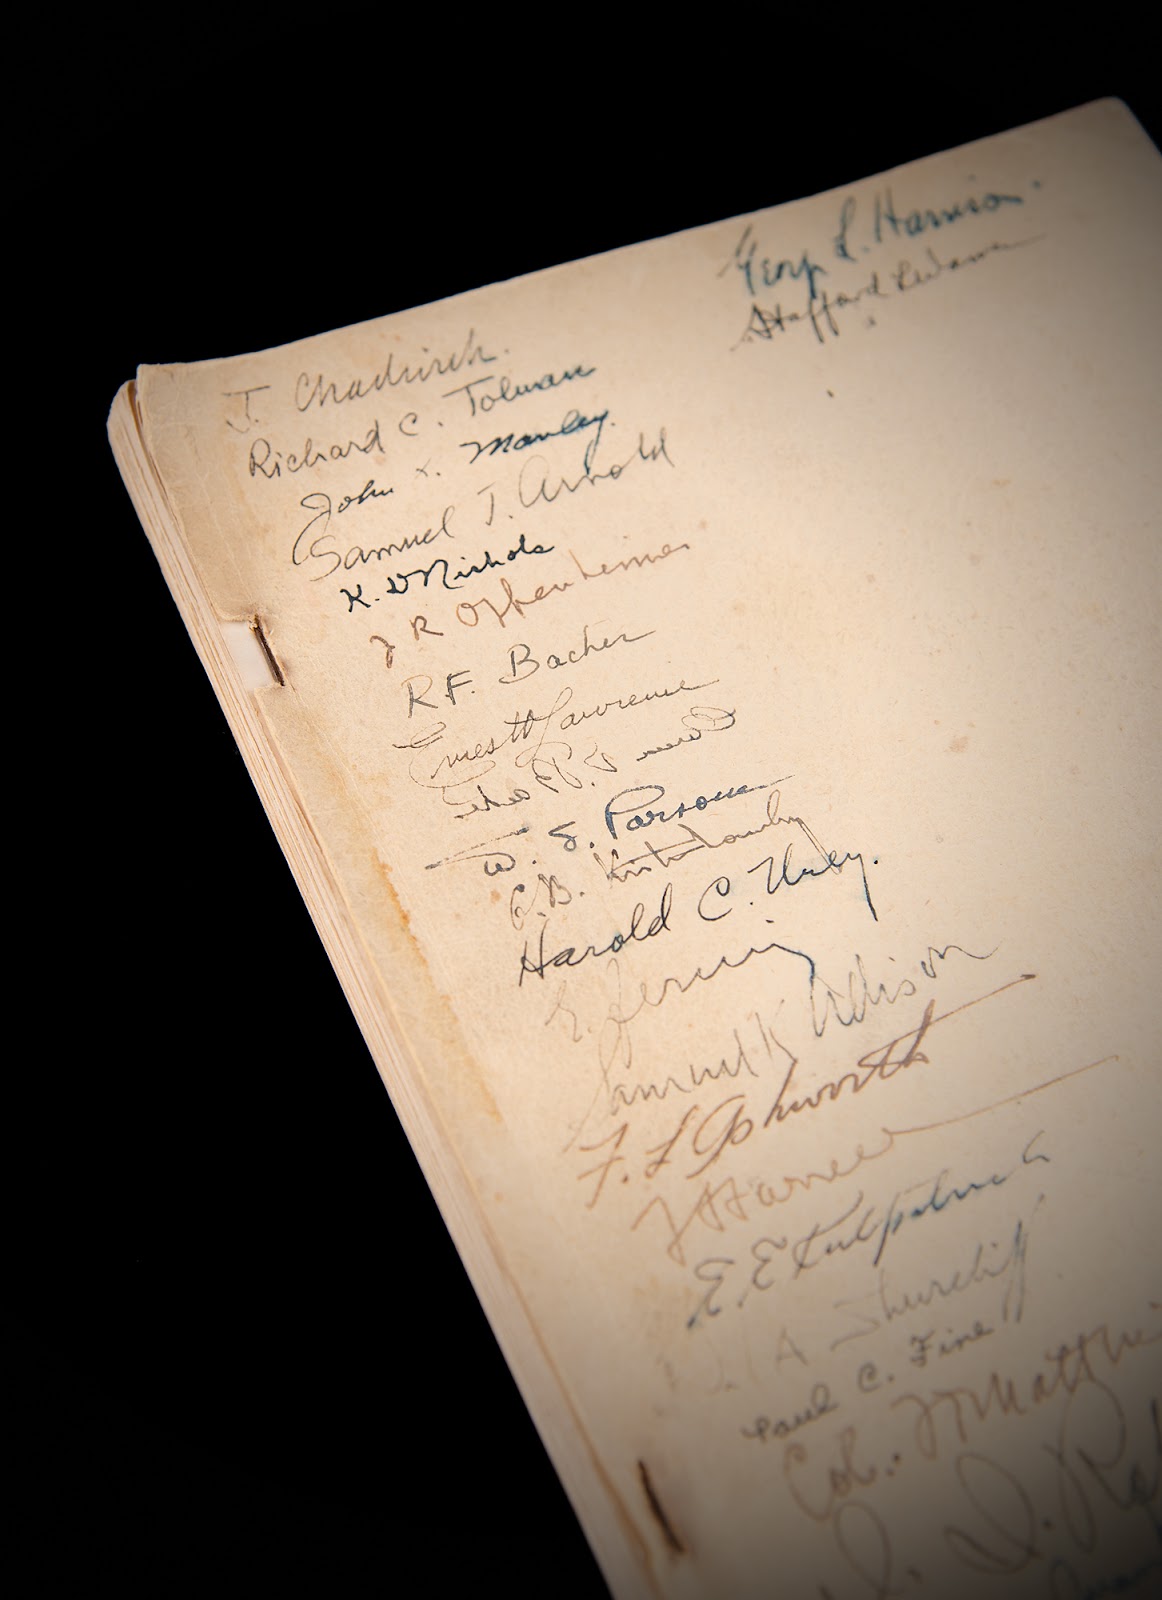 Atomic bomb report signed by many major contributors of the Manhattan Project including J. Robert Oppenheimer, Ernest O. Lawrence, James Chadwick, Enrico Fermi, and Isidor I. Rabi.